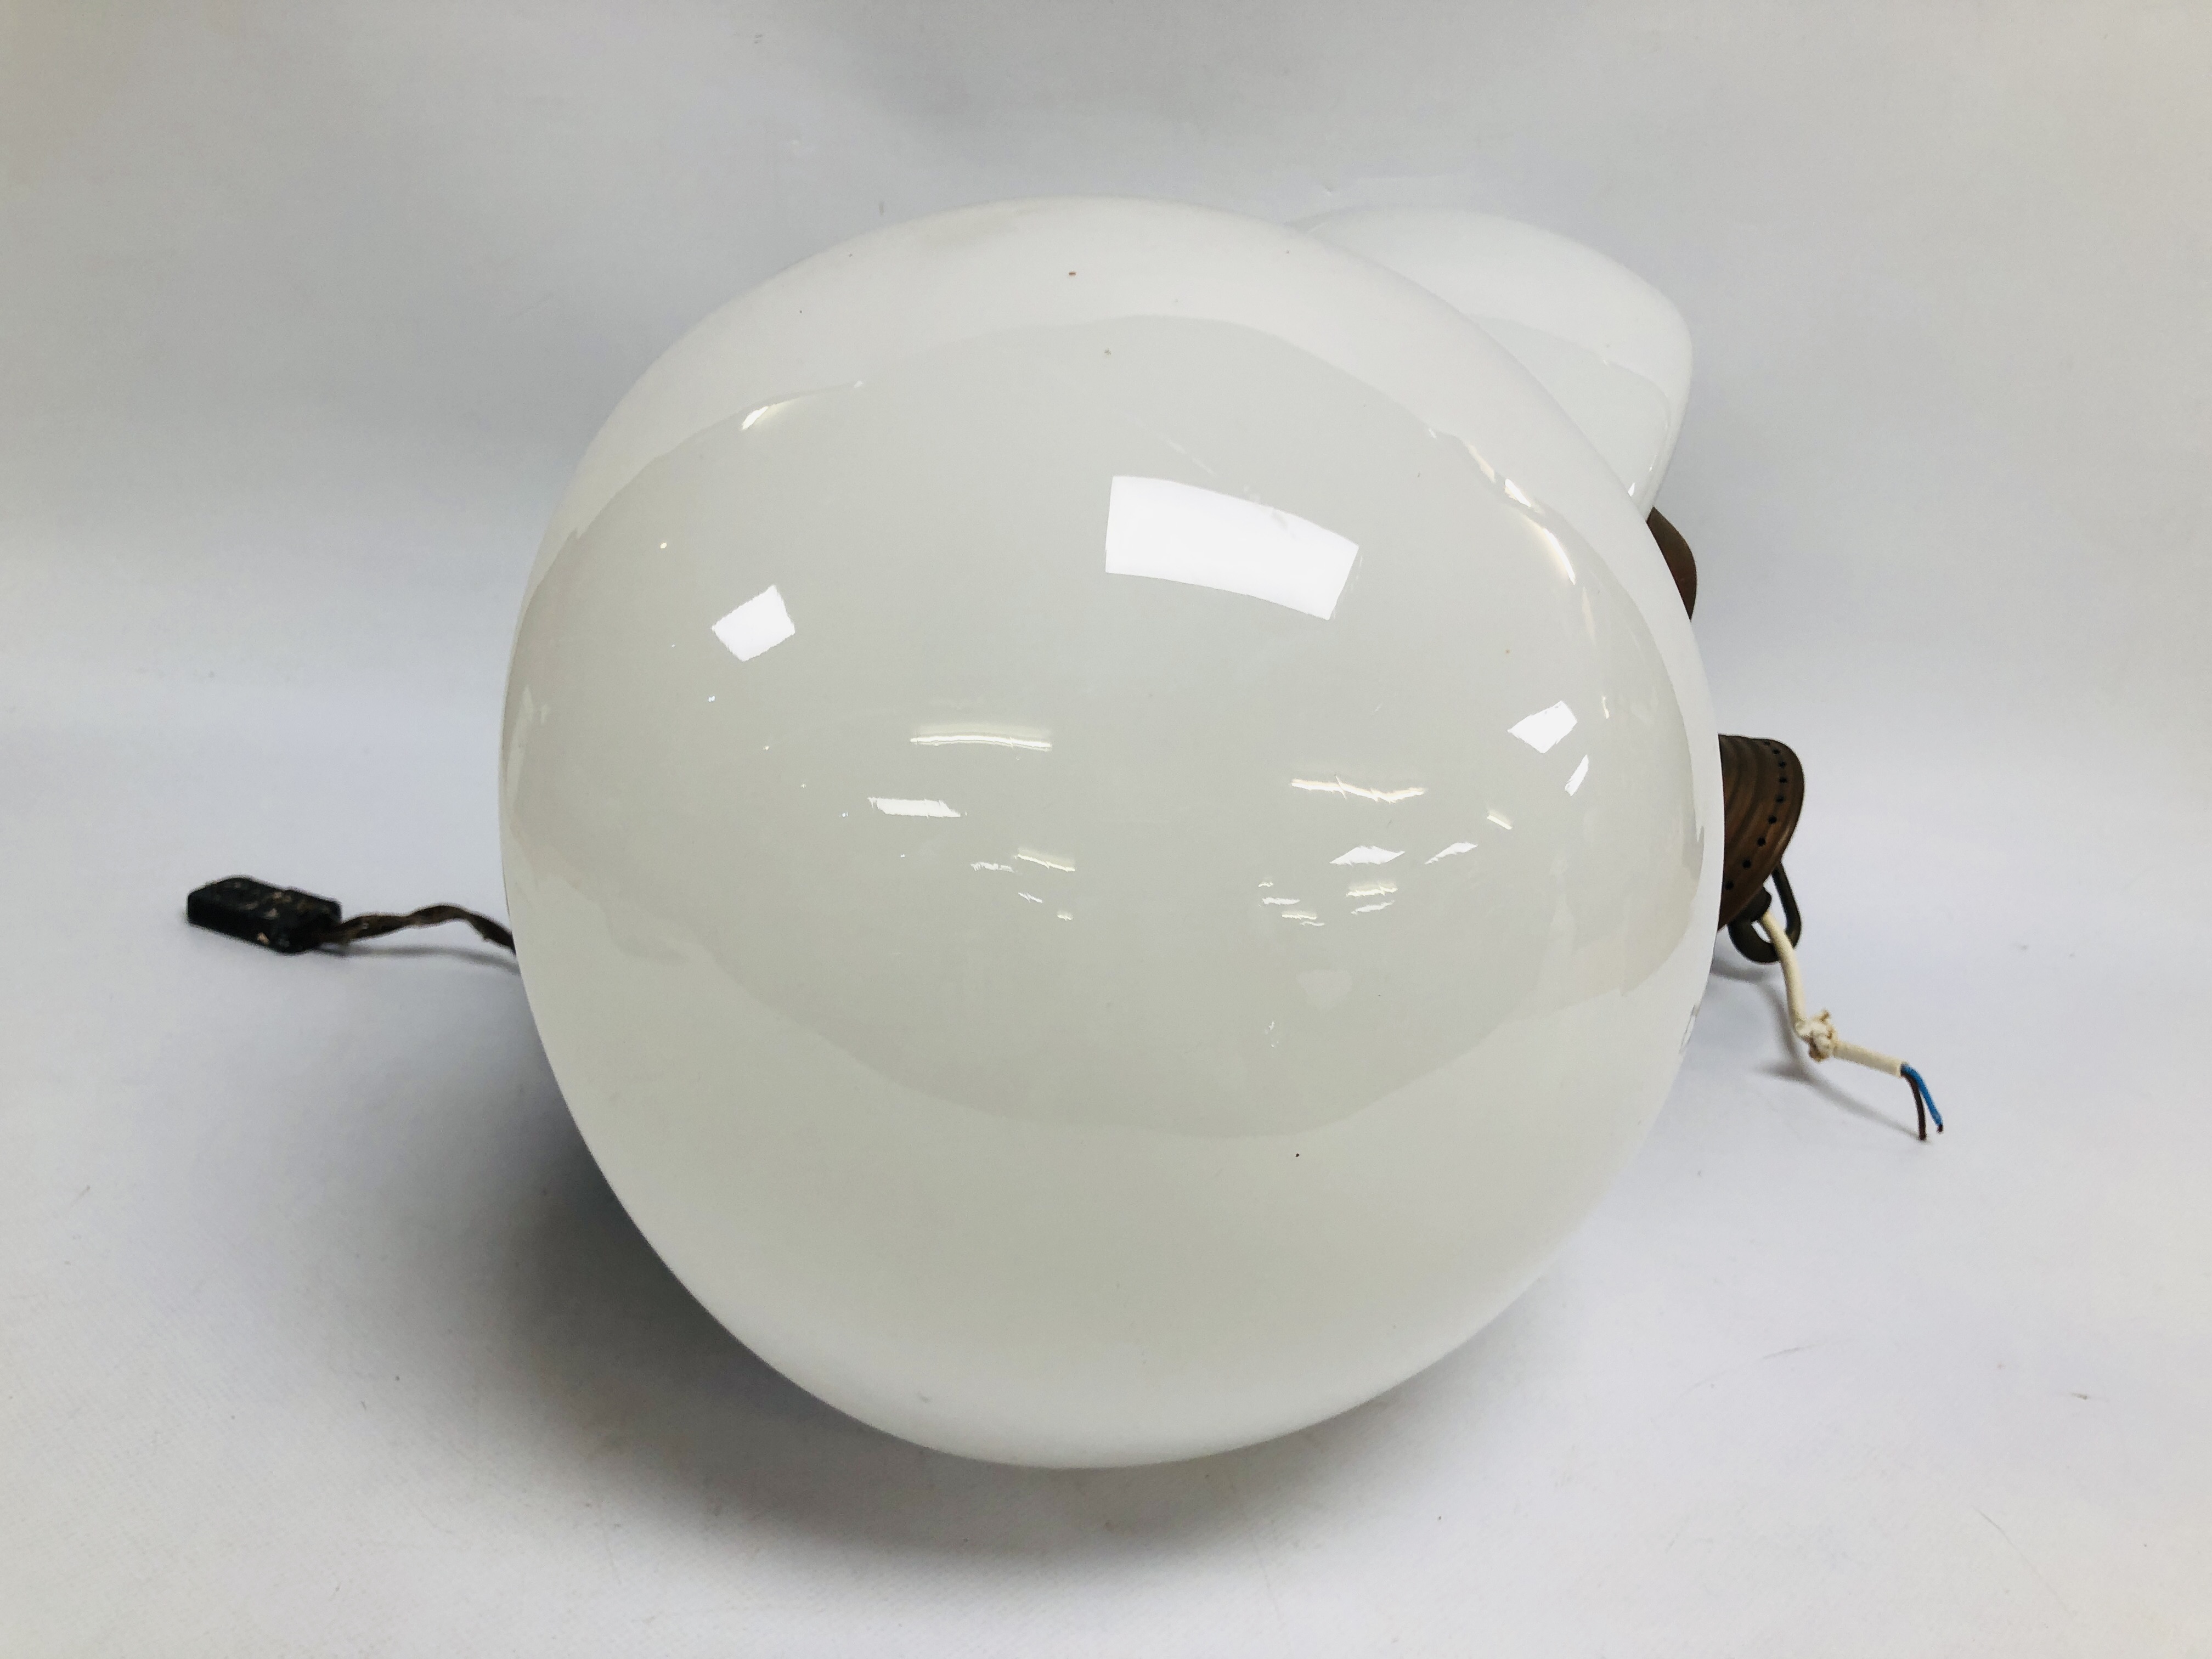 A PAIR OF VINTAGE COPPER AND OPAQUE GLASS DOMED CEILING LIGHTS (GLASS ON ONE HAS A FLAW/CRACK) - - Image 6 of 8